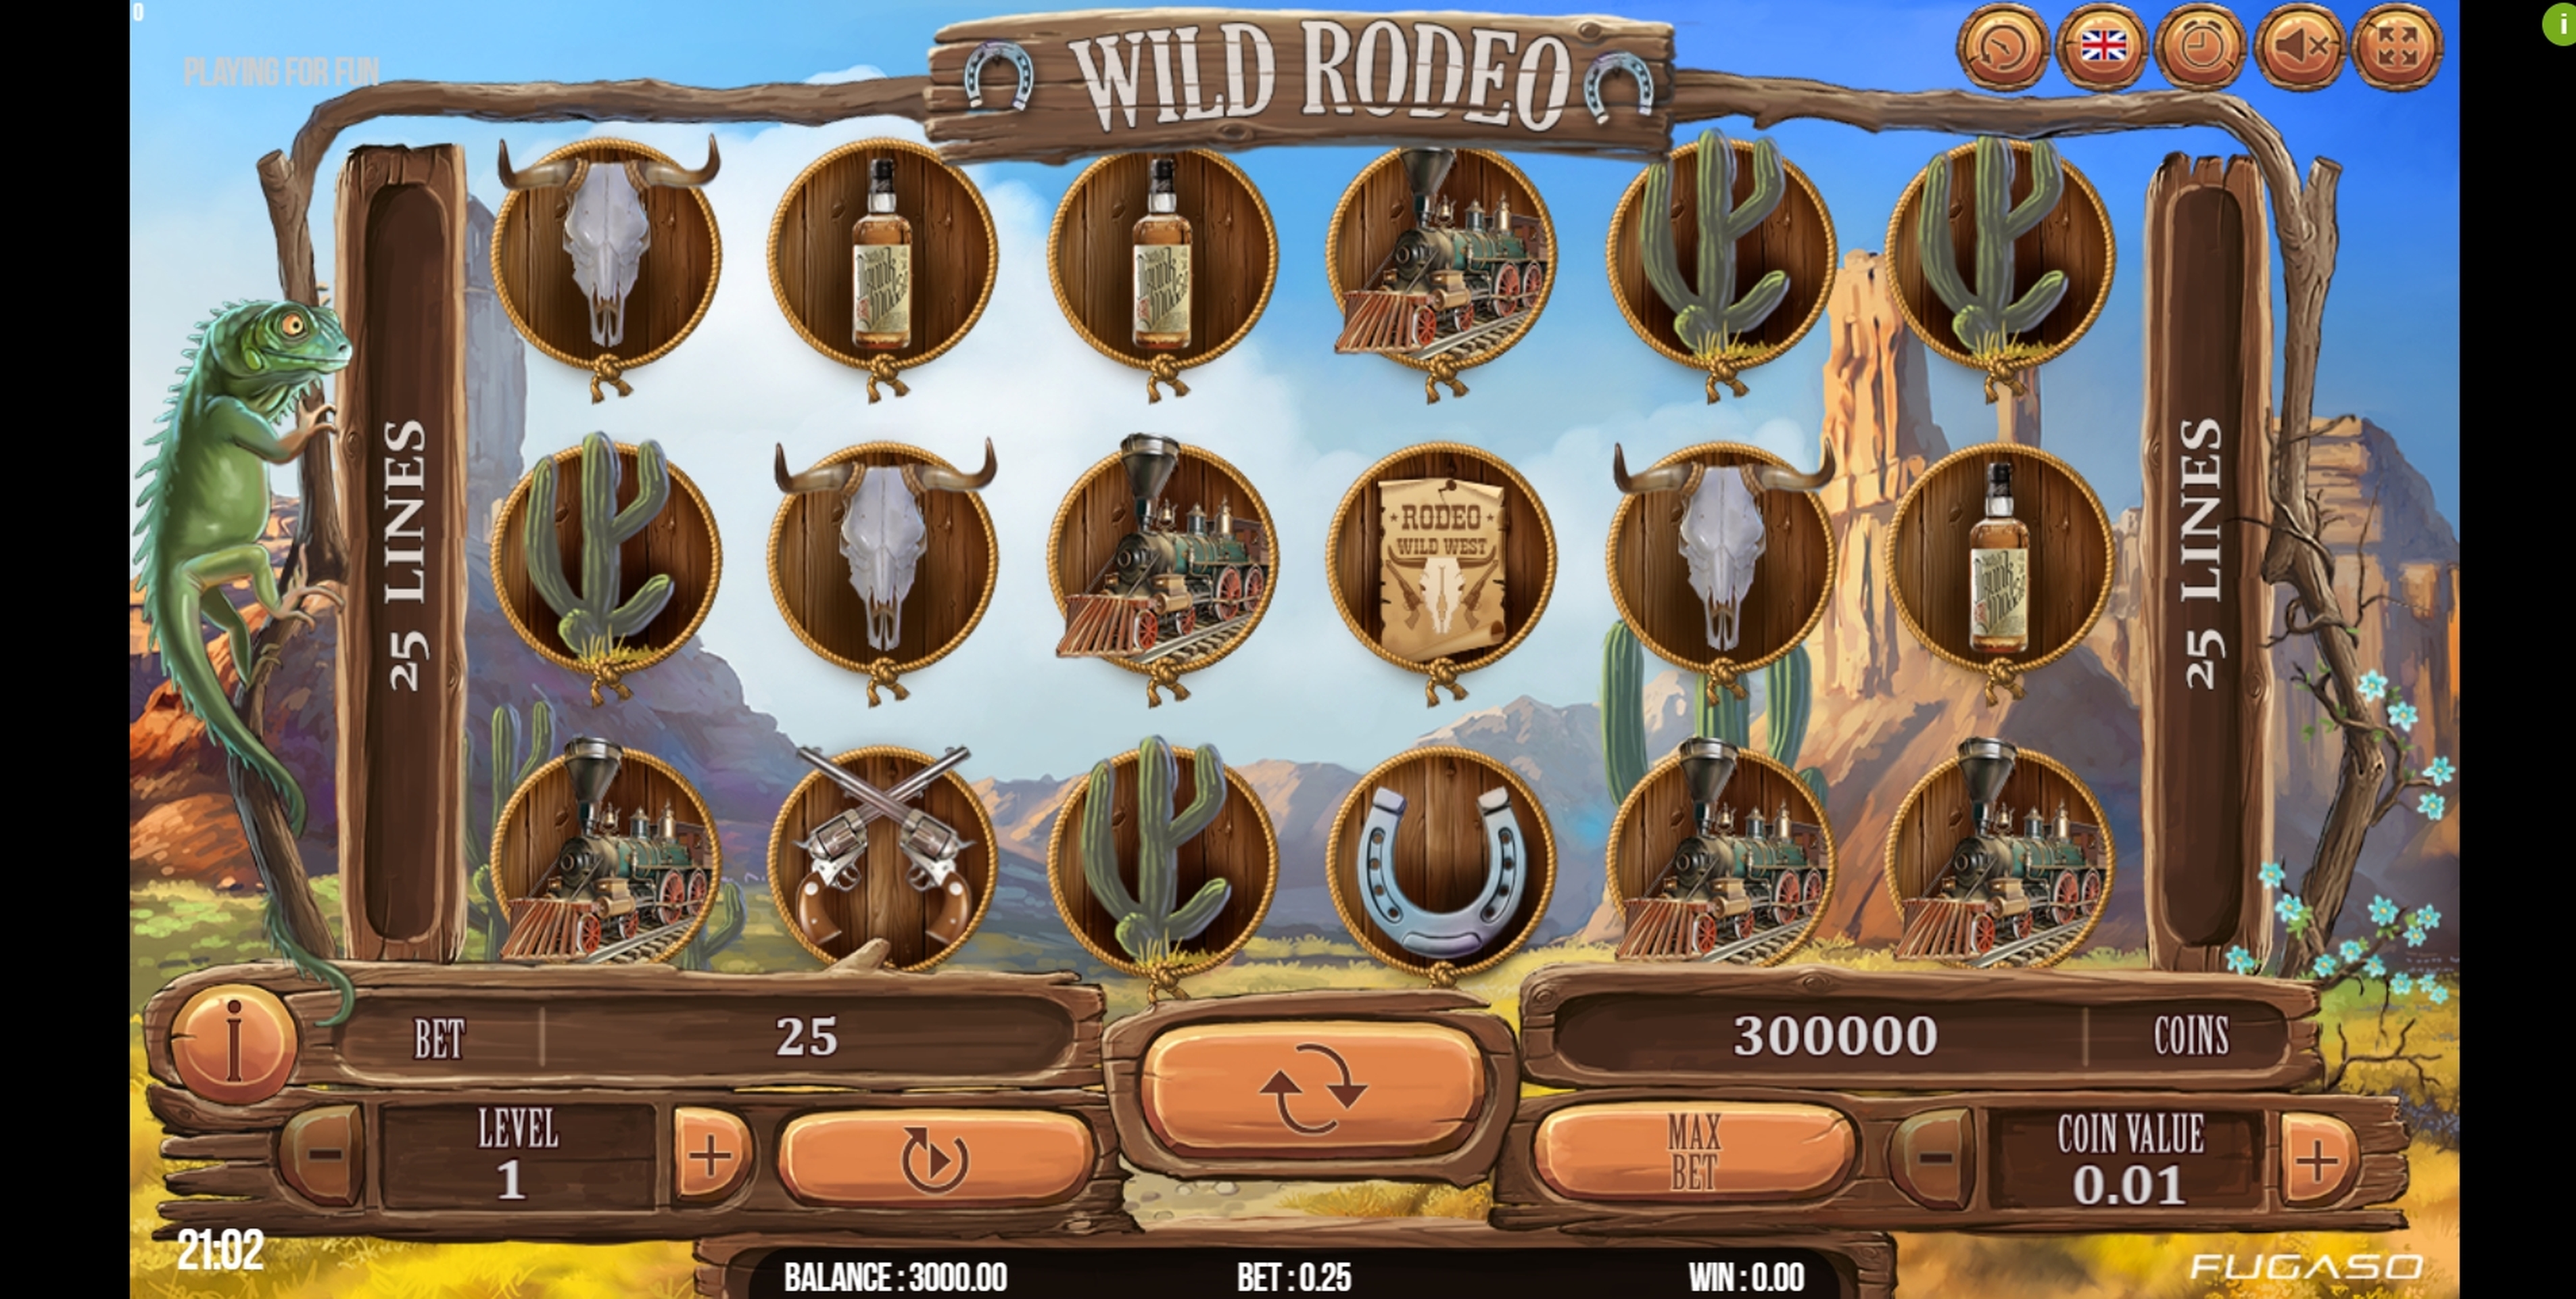 Reels in Wild Rodeo Slot Game by Fugaso